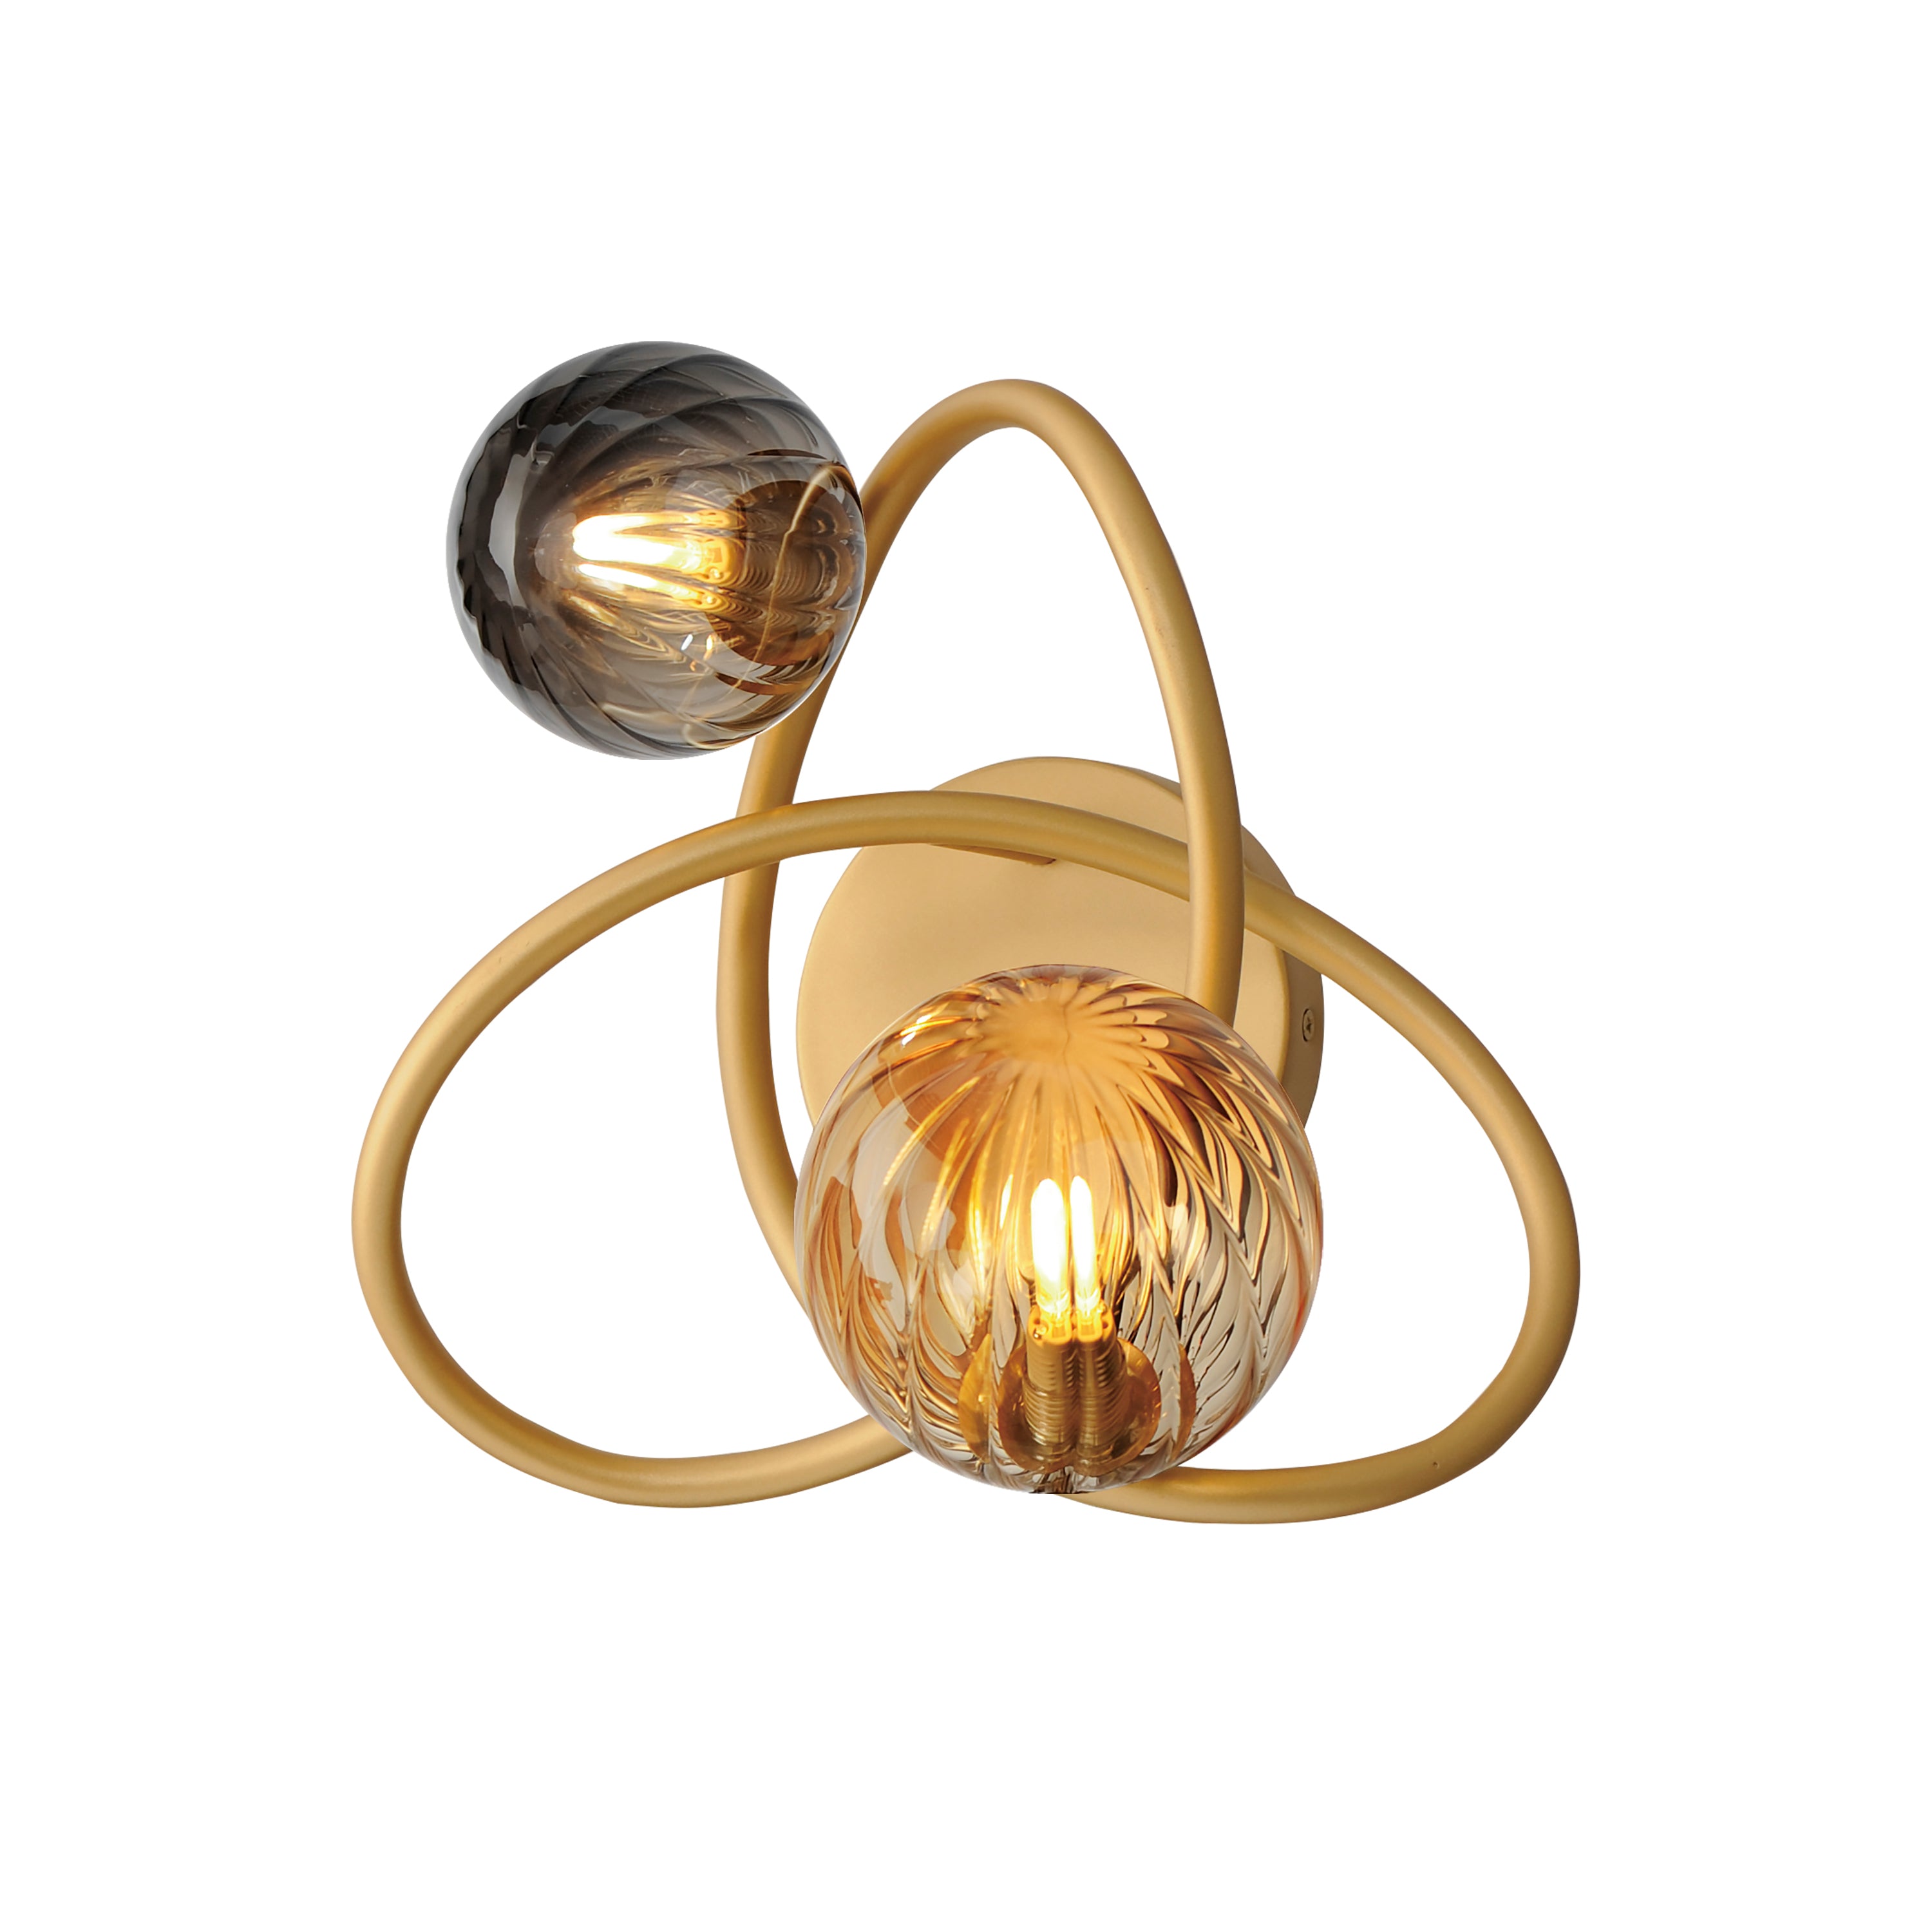 Planetary-Wall Sconce Wall Light Fixtures ET2 x11.5x10.5 Gold 